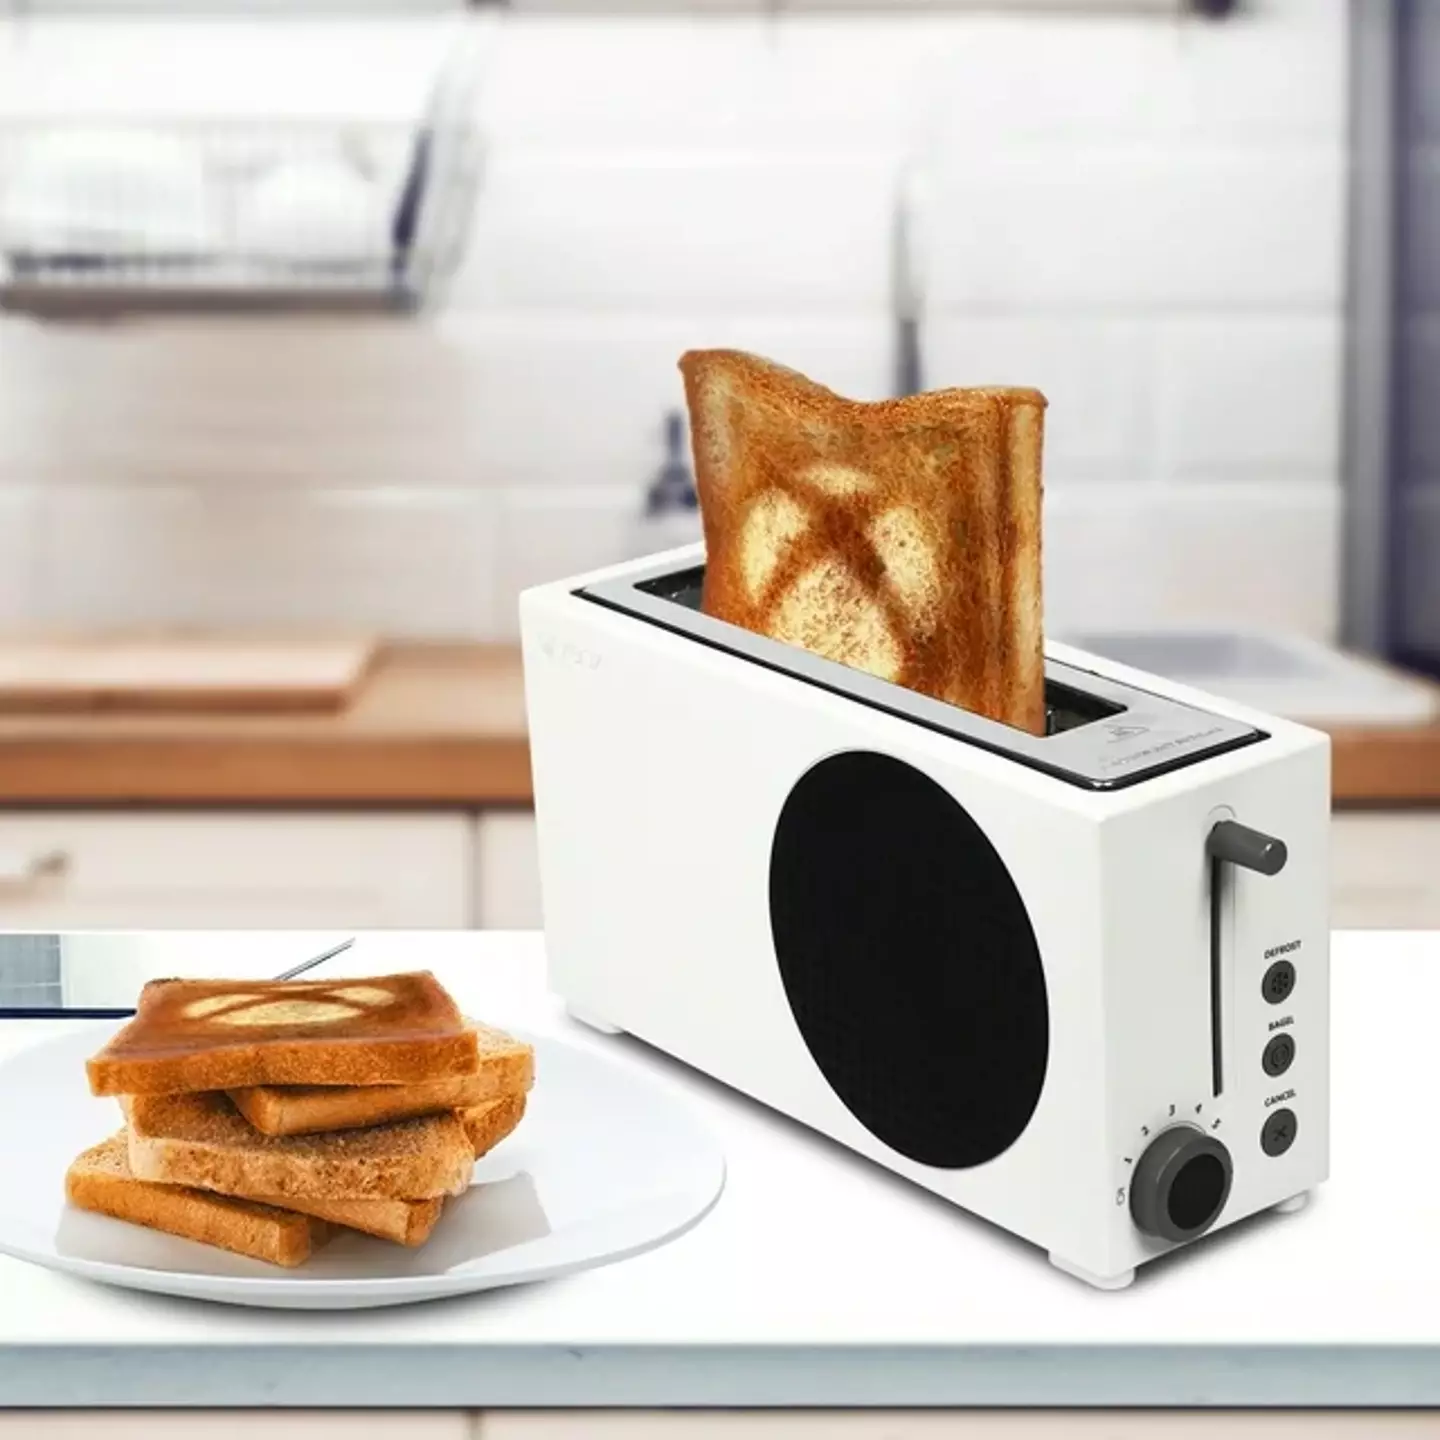 The gadget toasts the Xbox logo onto the bread - because who wouldn't want that?